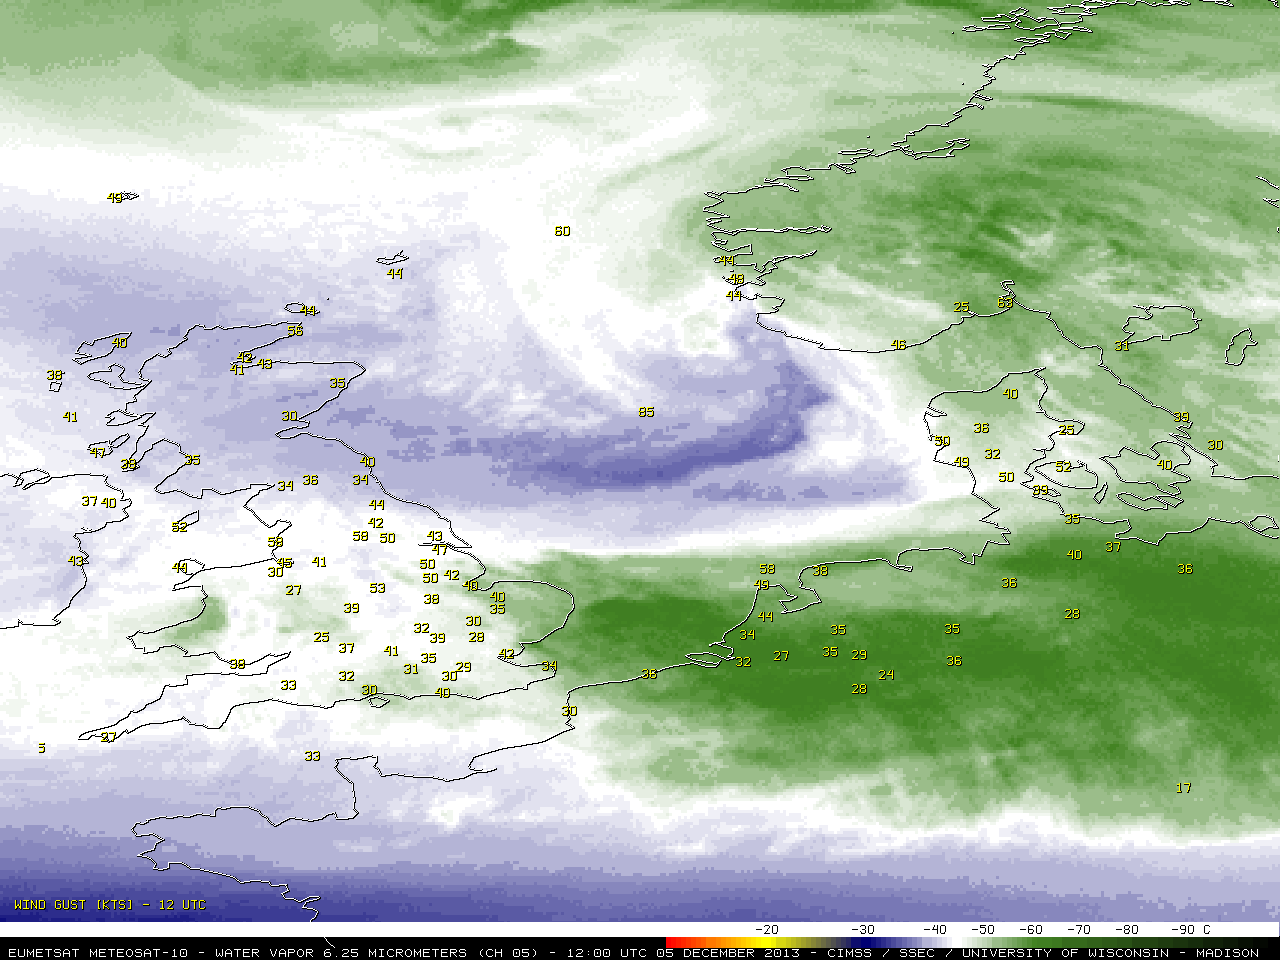 Meteosat-10 6.25 Âµm water vapor channel images with surface wind gusts (click to play animation)